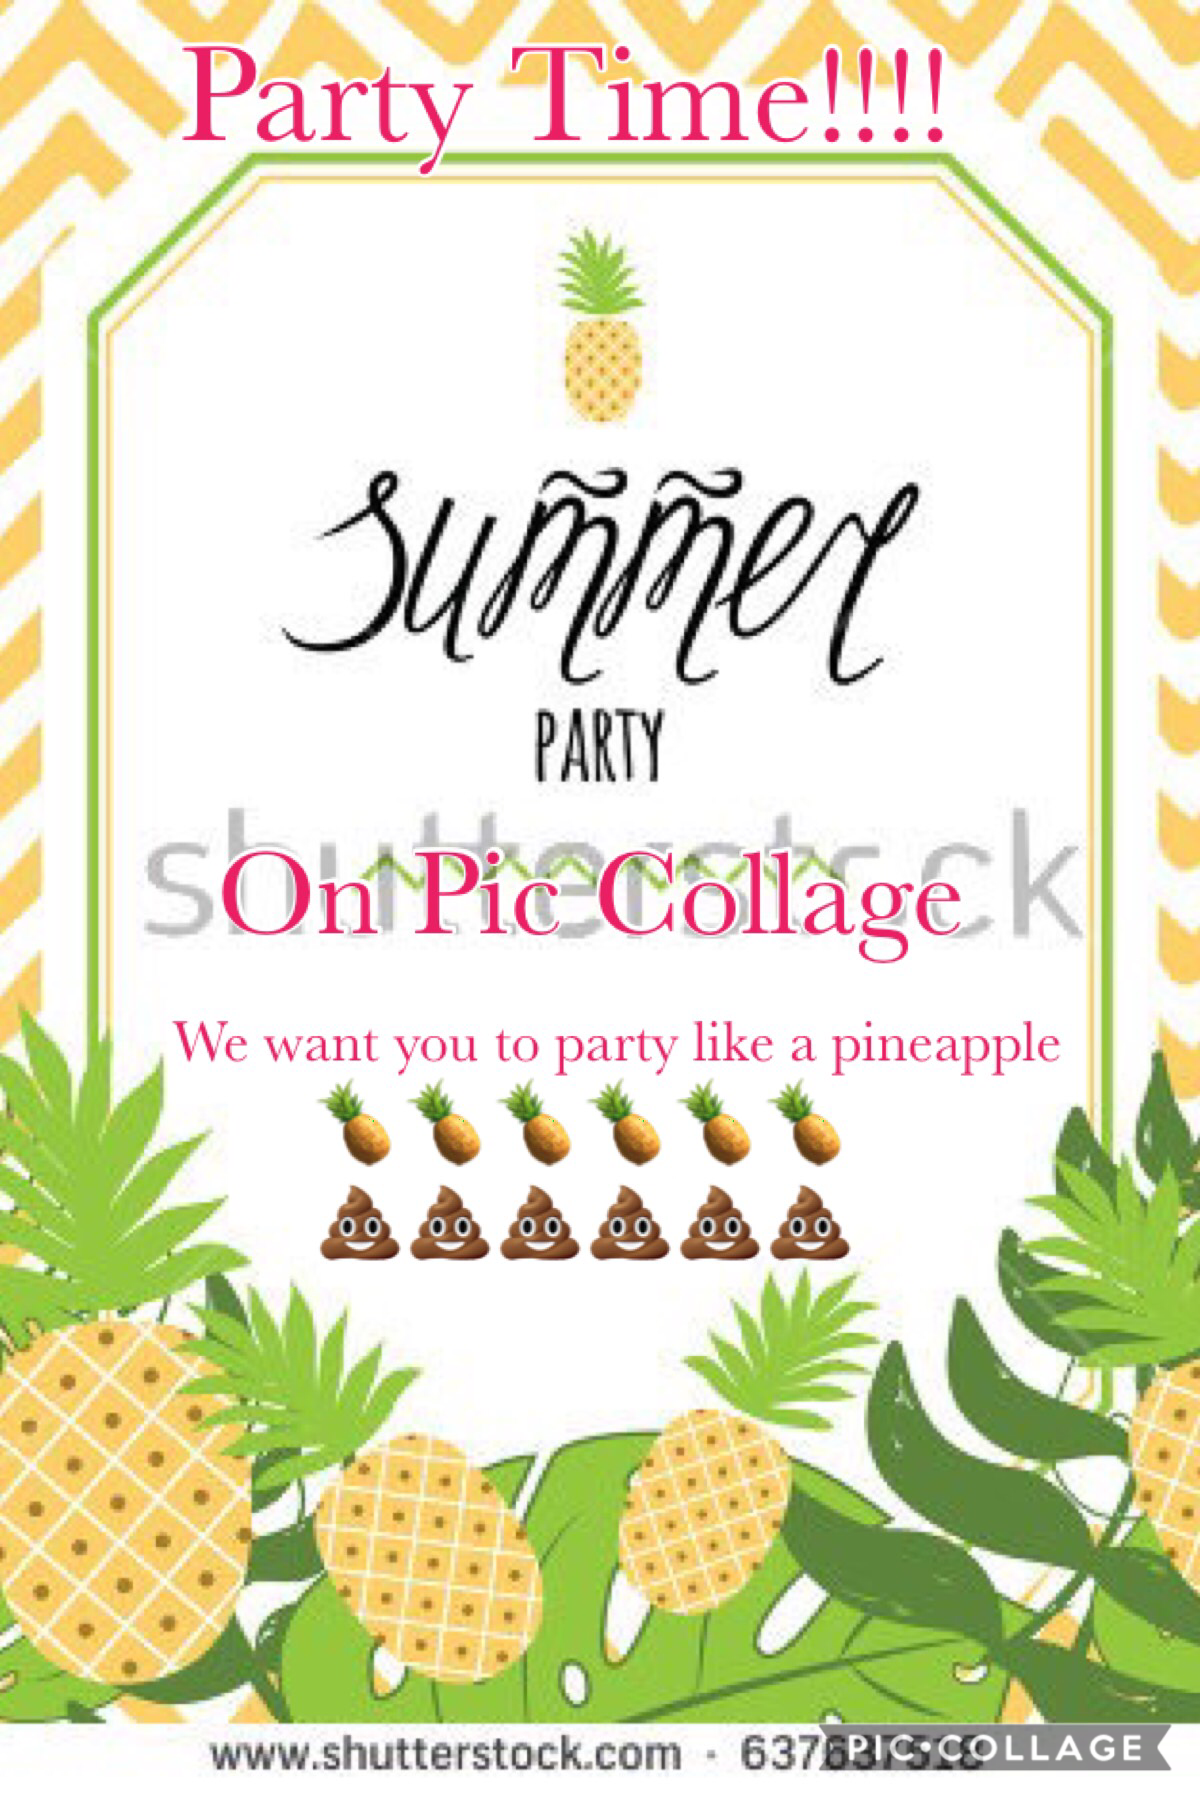 🍍Tap🍍
By EMH18
PINEAPPLE PARTY AIN’T STOPPING!!!!!!! Join us as we celebrate 230 followers!!! 💥💥